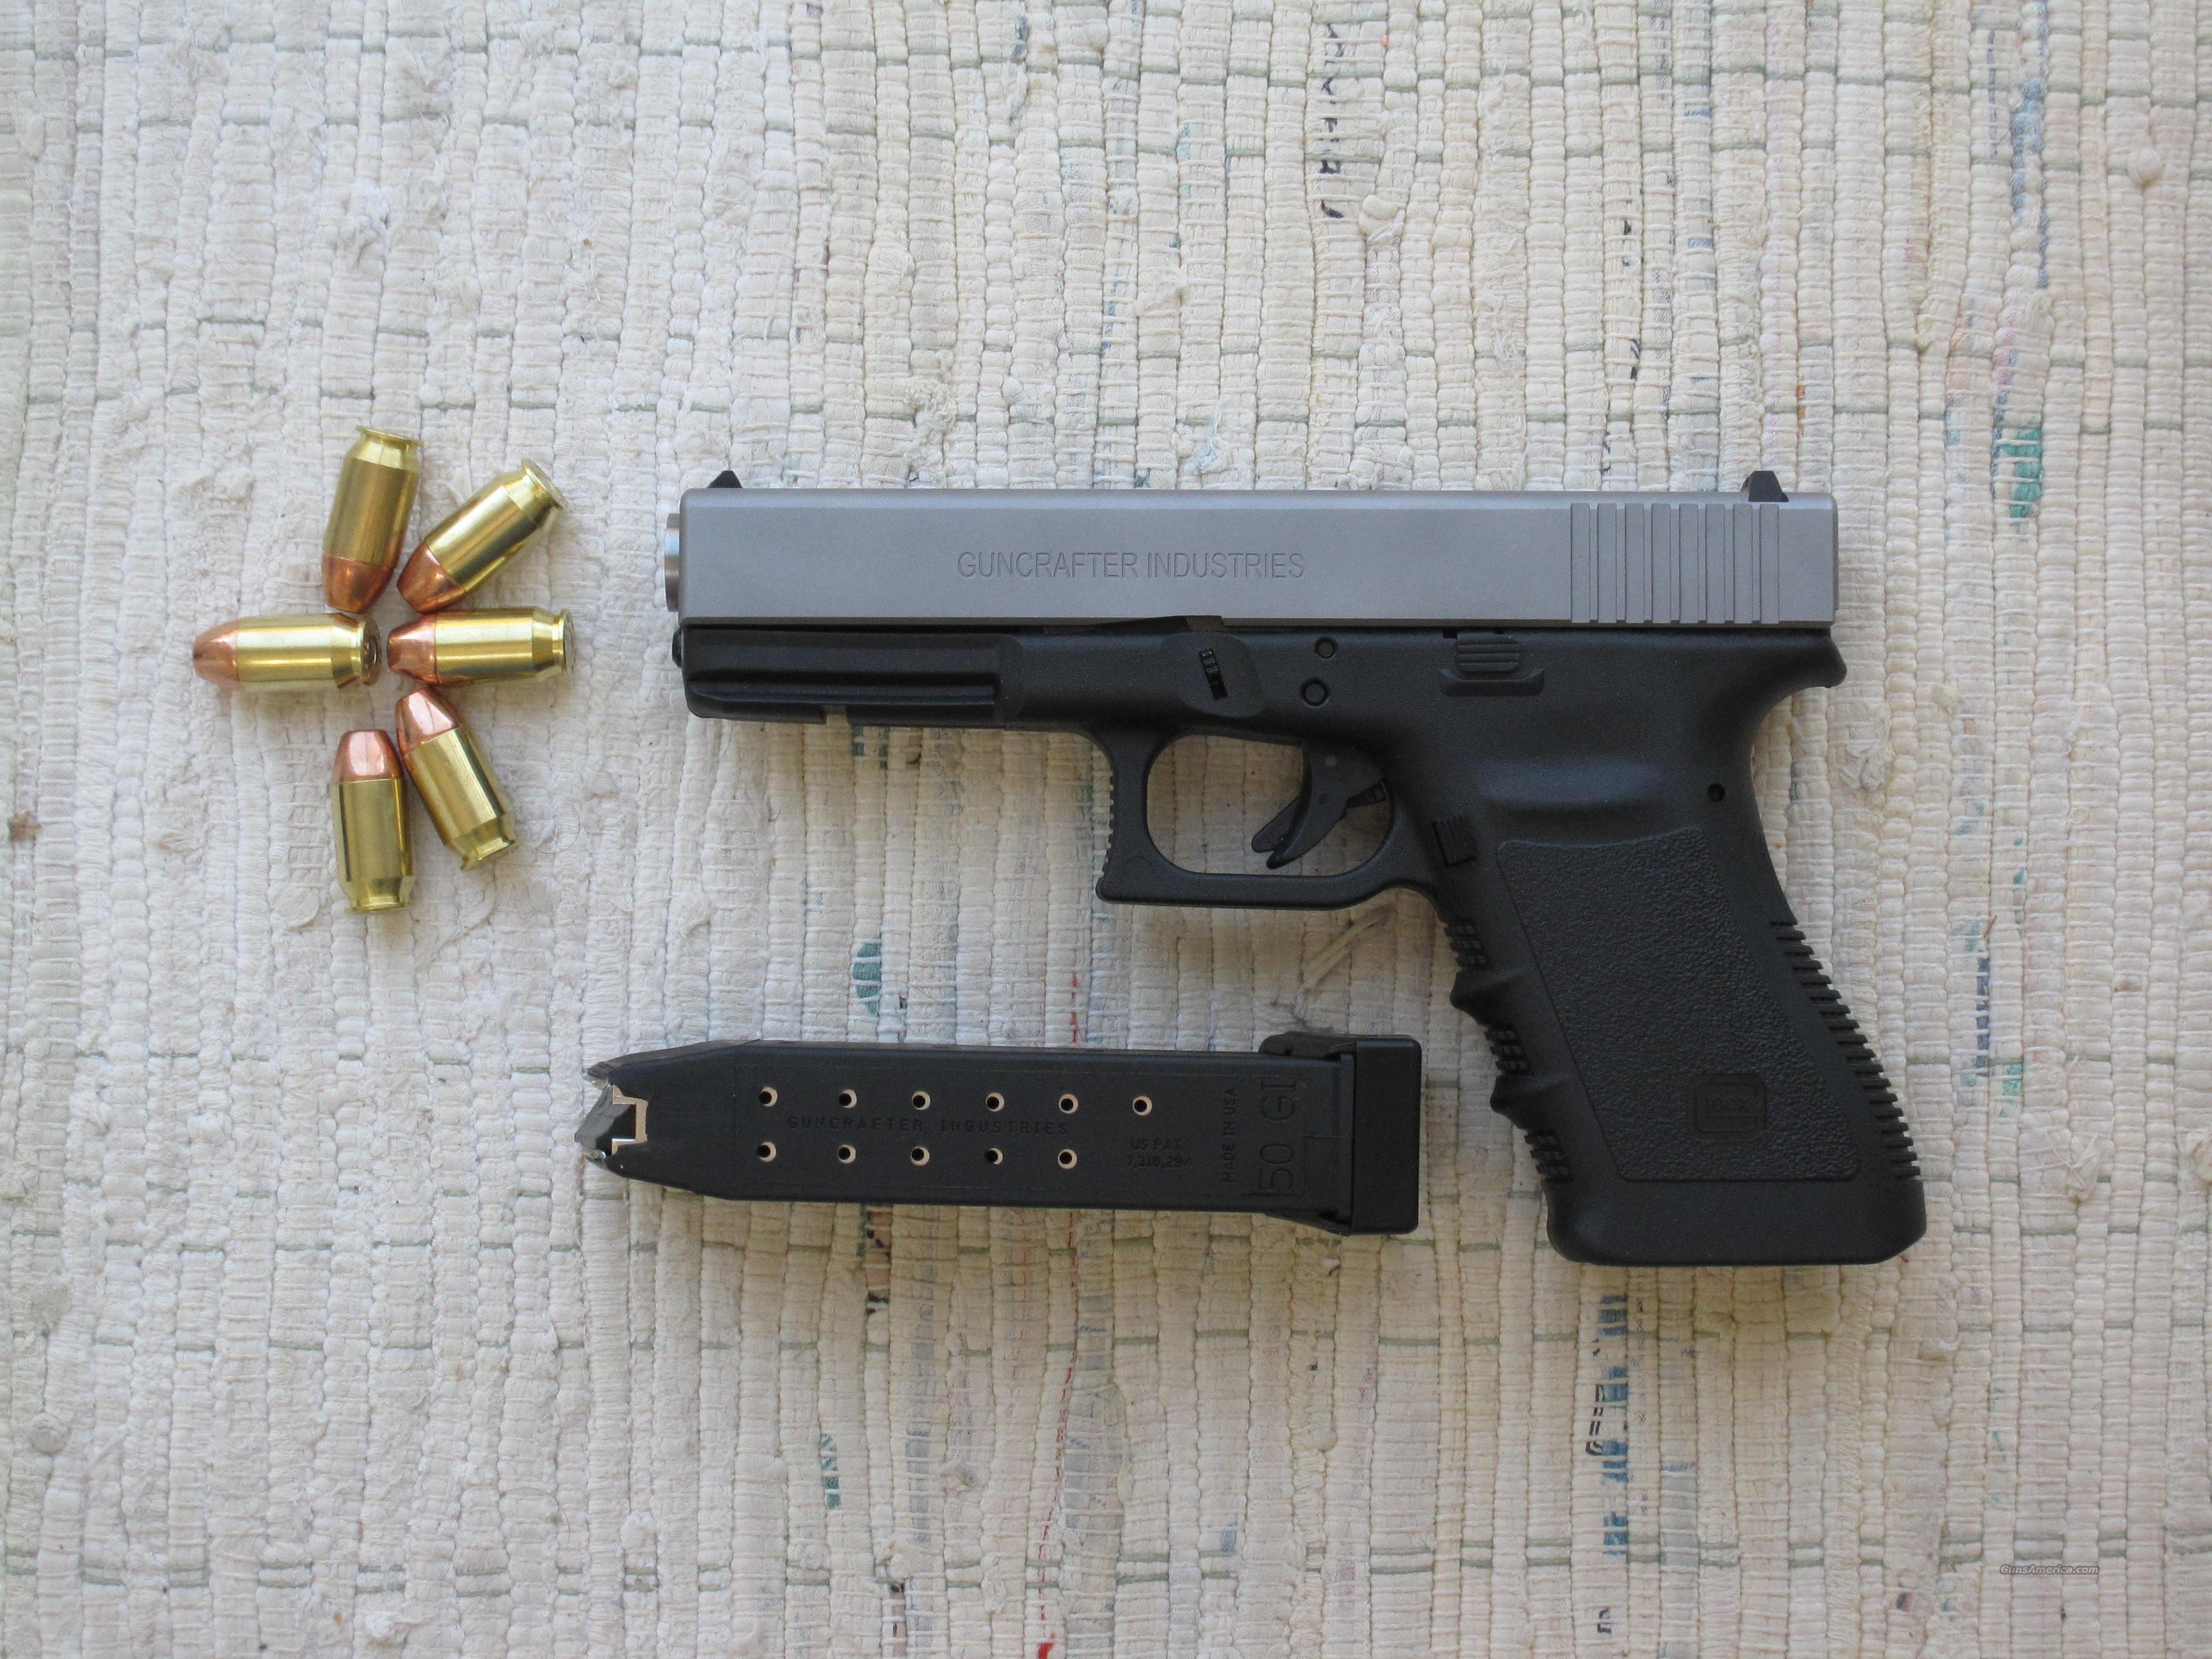 Glock 21 Dual Caliber With Guncrafter S 50 Gi For Sale